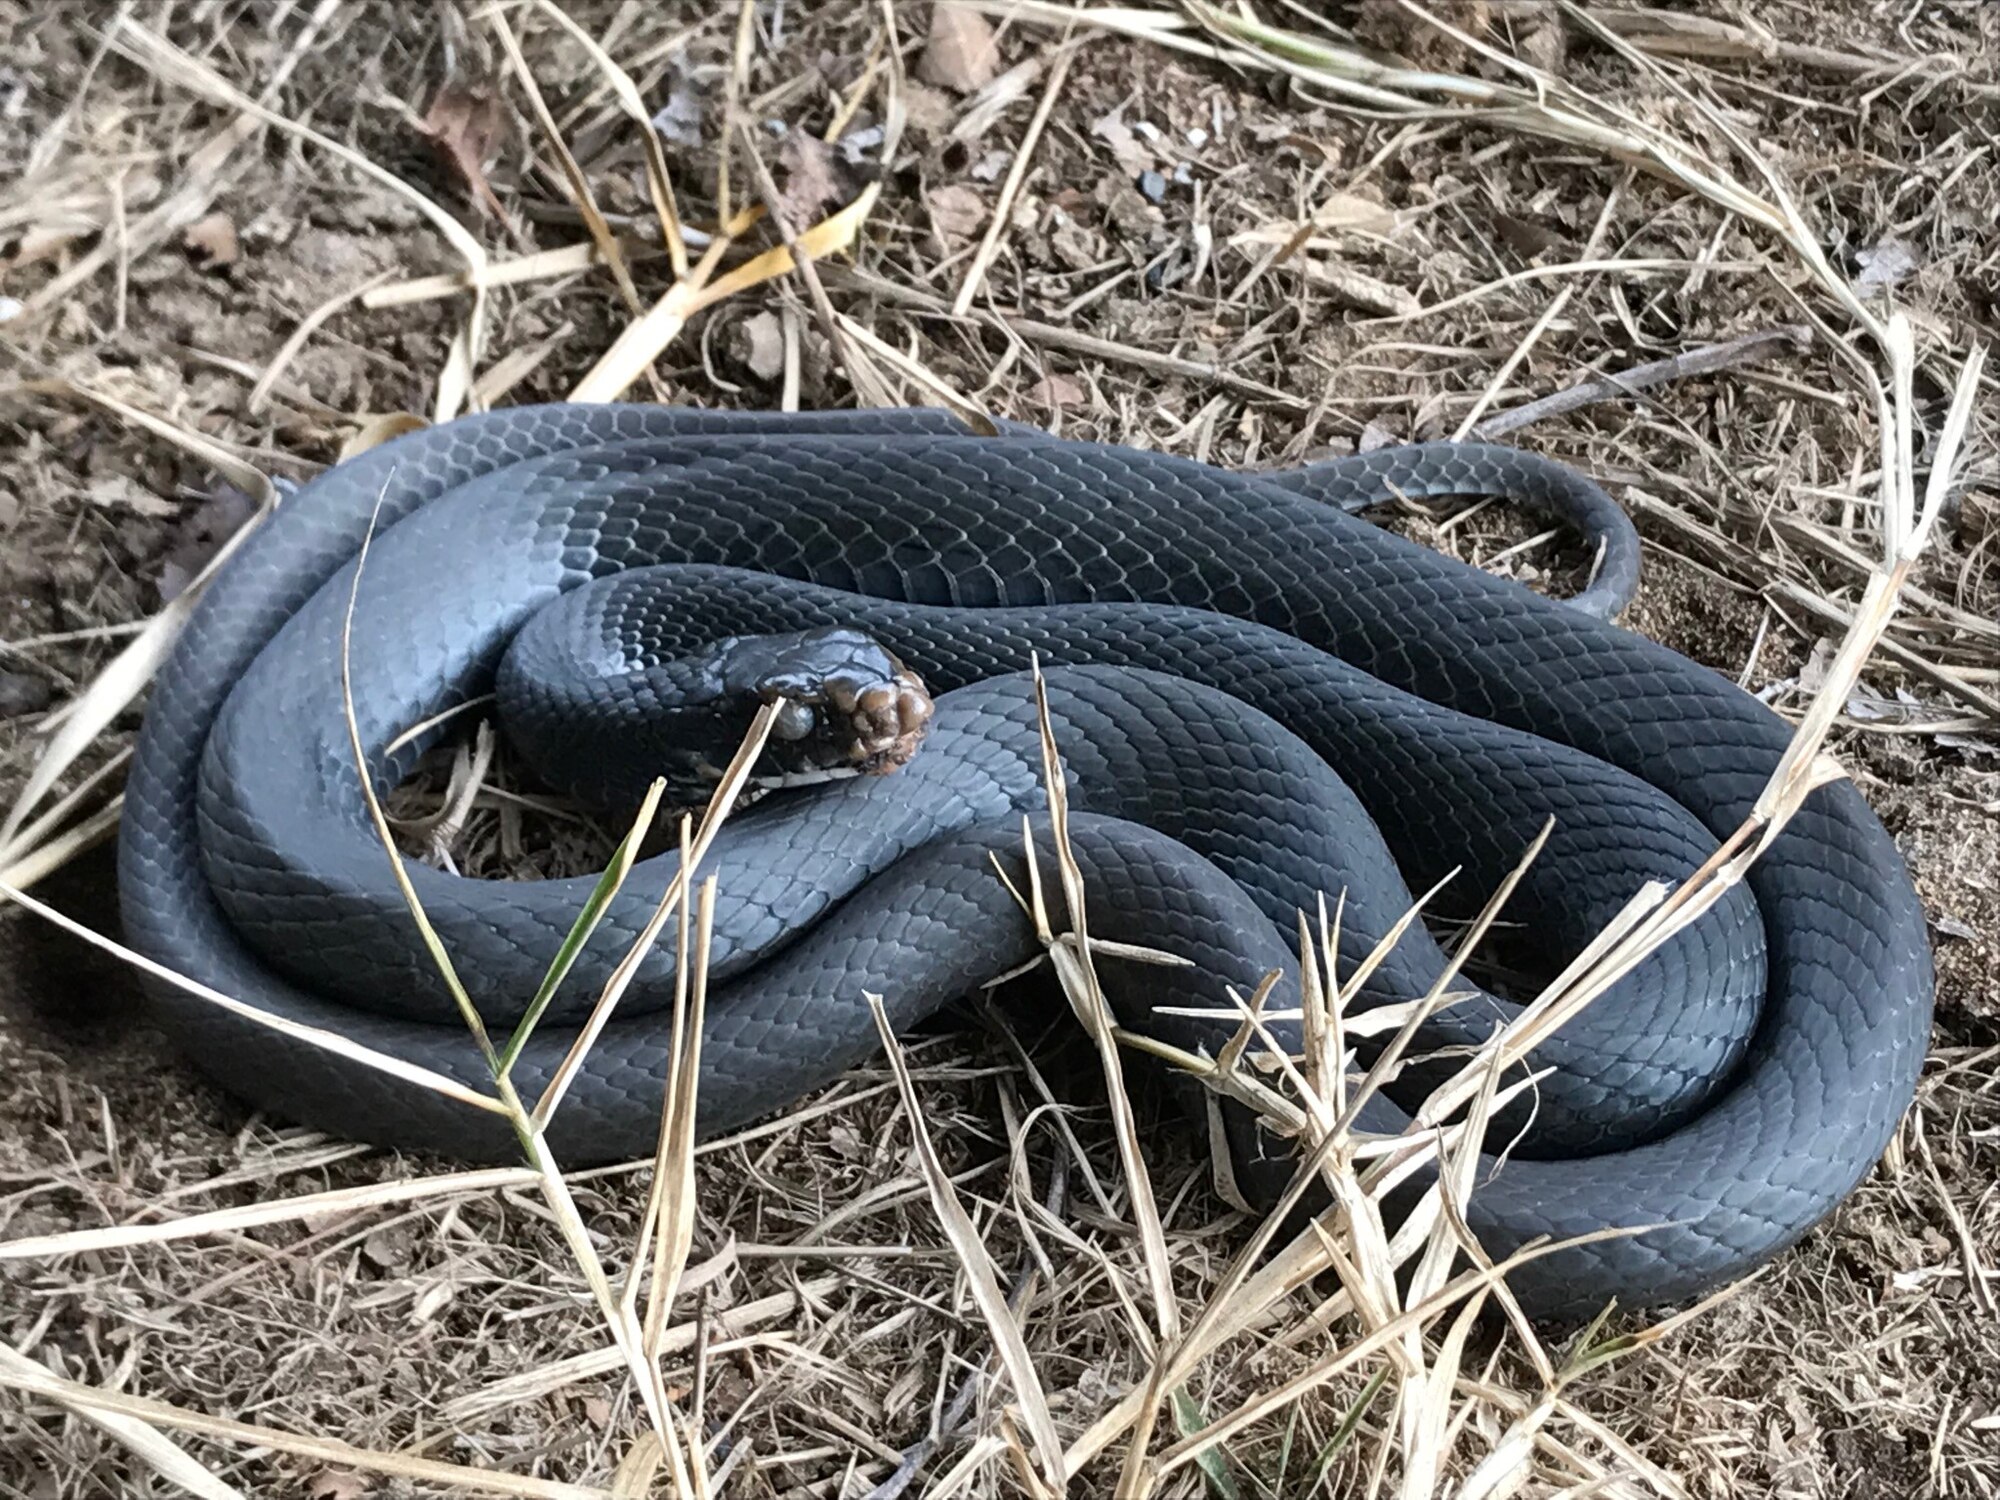 Snake Fungal Disease, as seen in this black racer, can inhibit hunting and feeding. (Photo courtesy of Jeff Butts; Virginia Beach, Virginia)